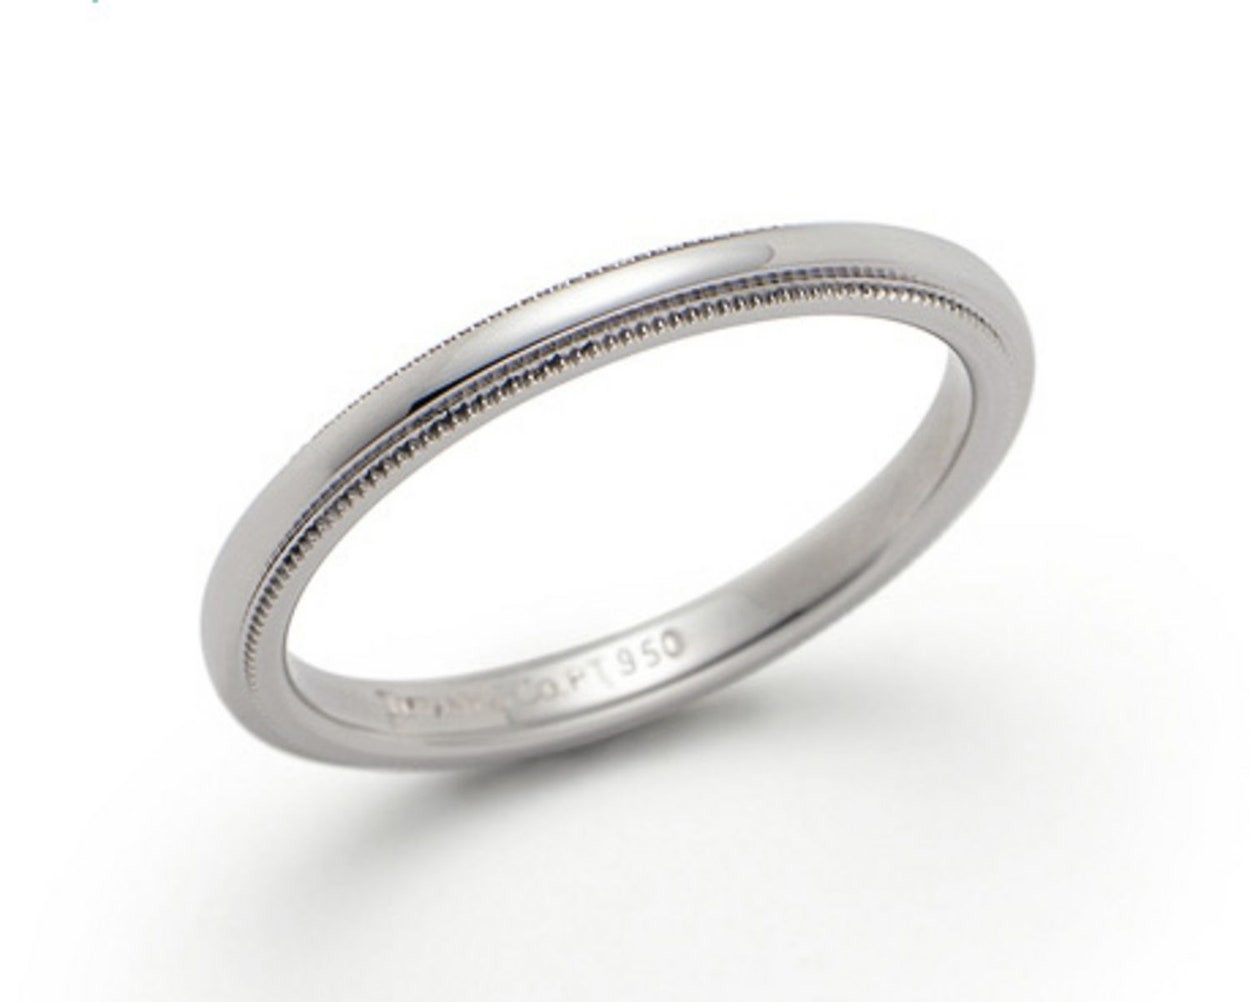 Groom Wedding Bands
 15 Men s Wedding Bands Your Groom Won t Want to Take f